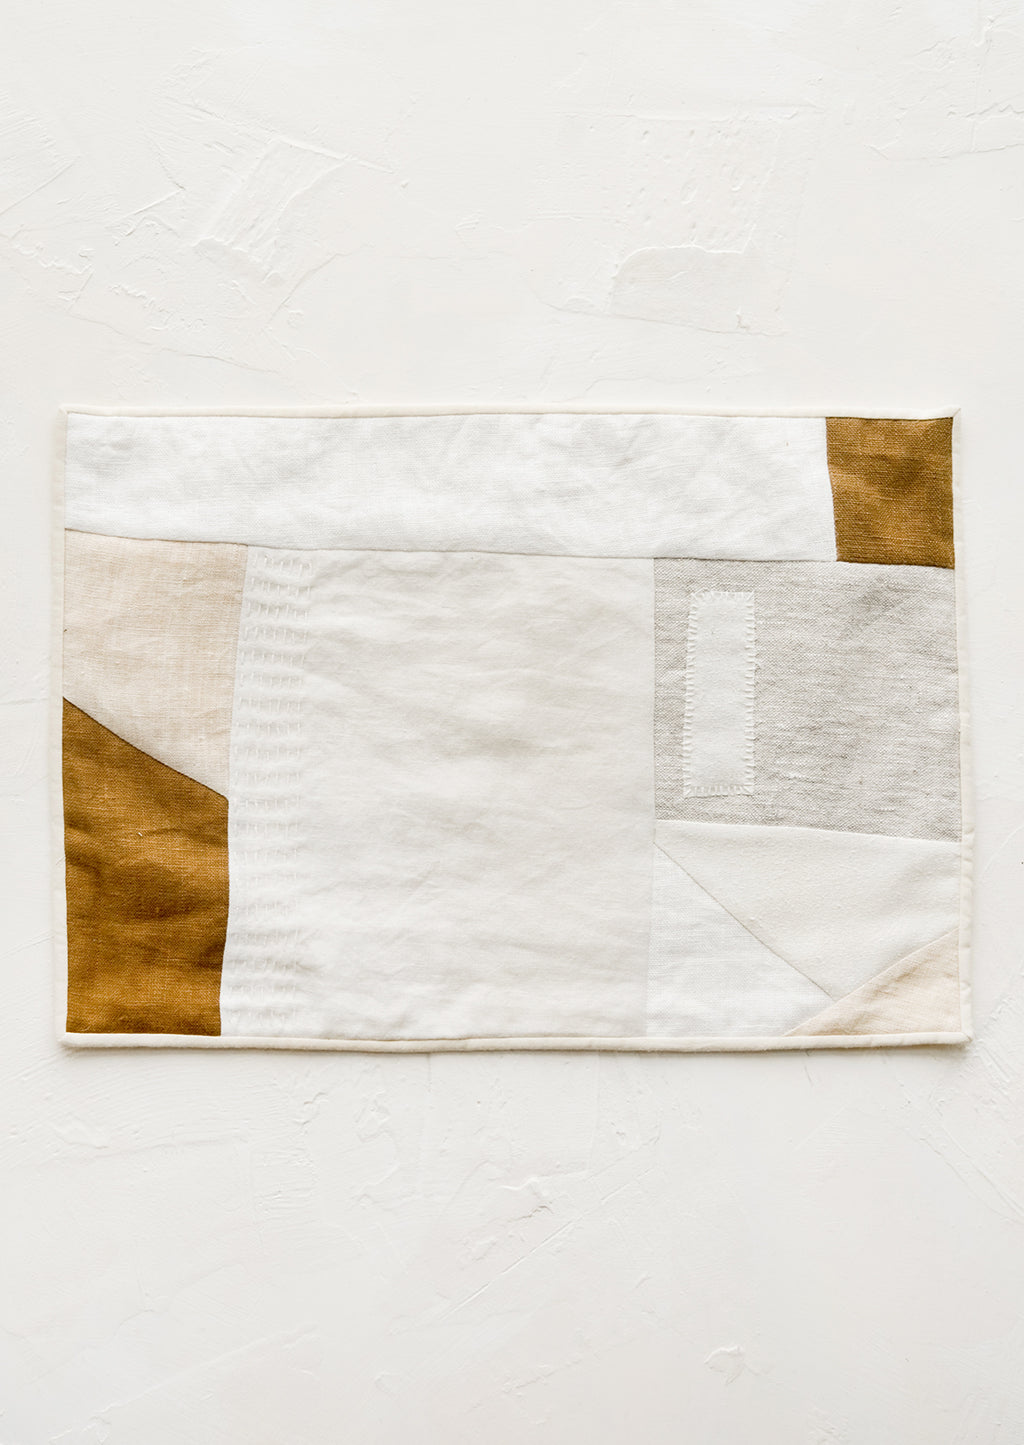 2: A rectangular placemat with patchwork design in natural shades.